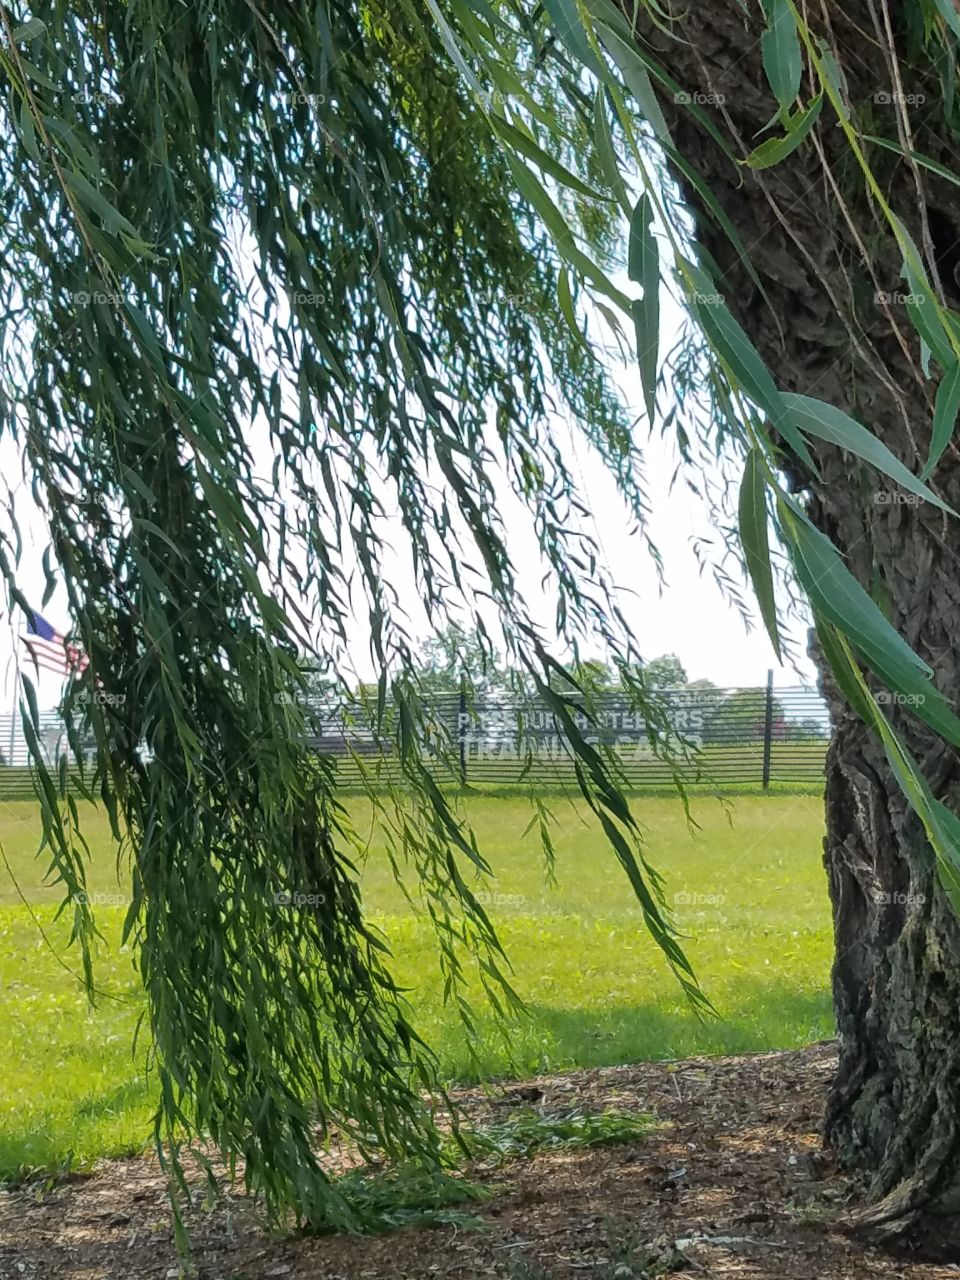 steelers training camp fence between willow tree with US flag waving in the background